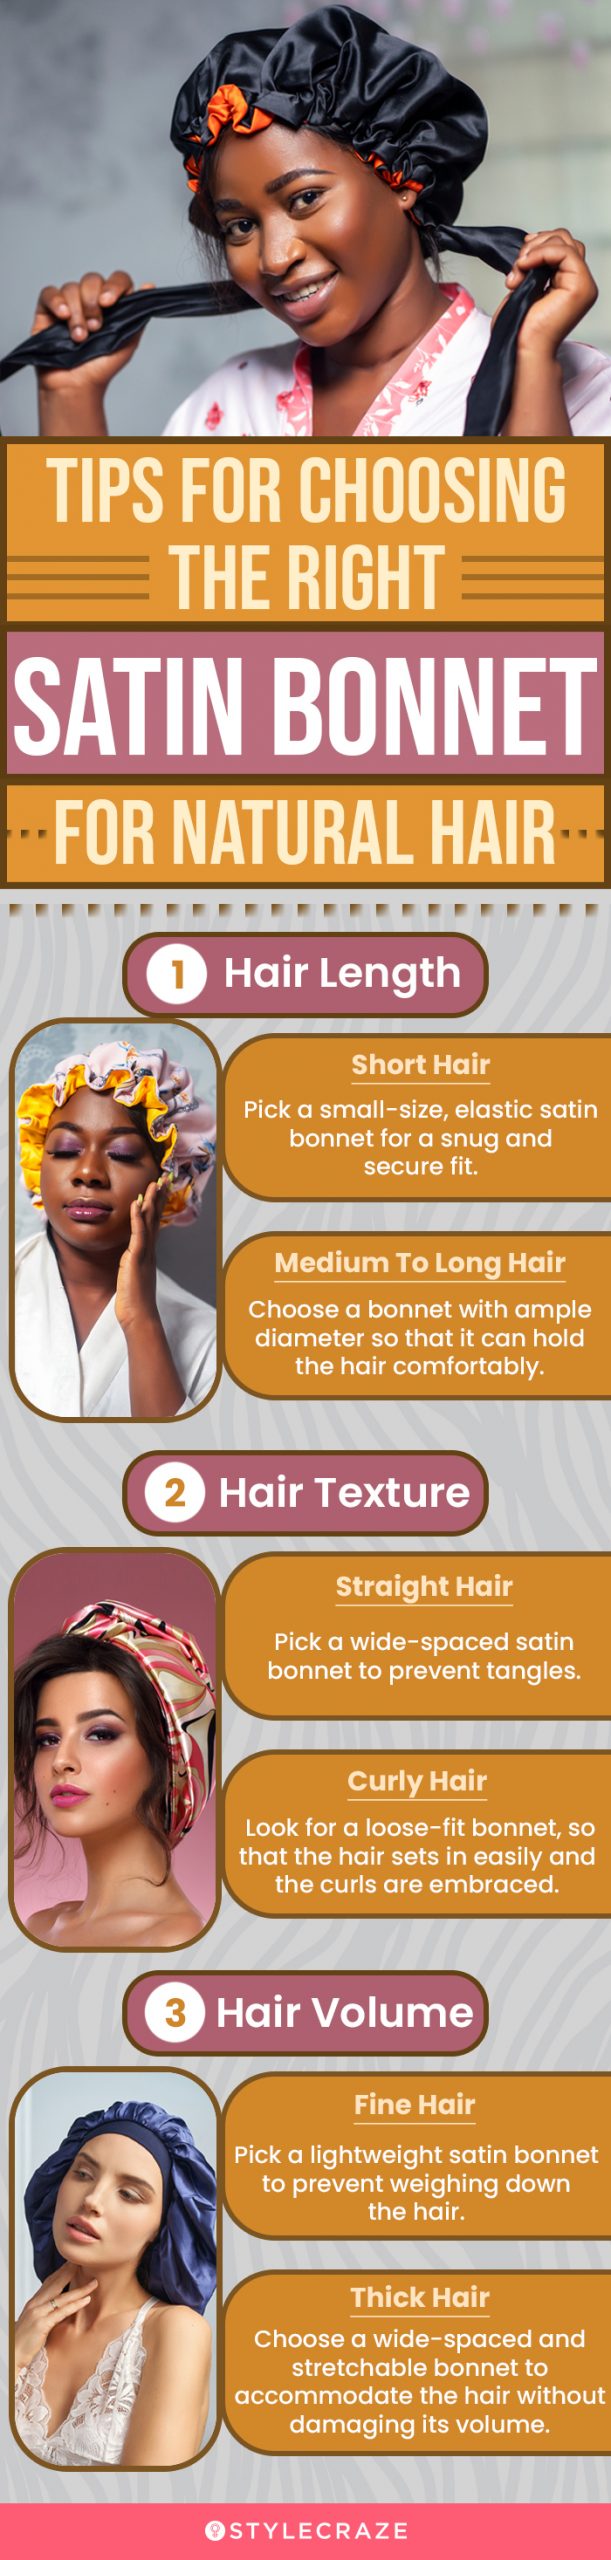 Tips For Choosing The Right Satin Bonnet For Natural Hair (infographic)